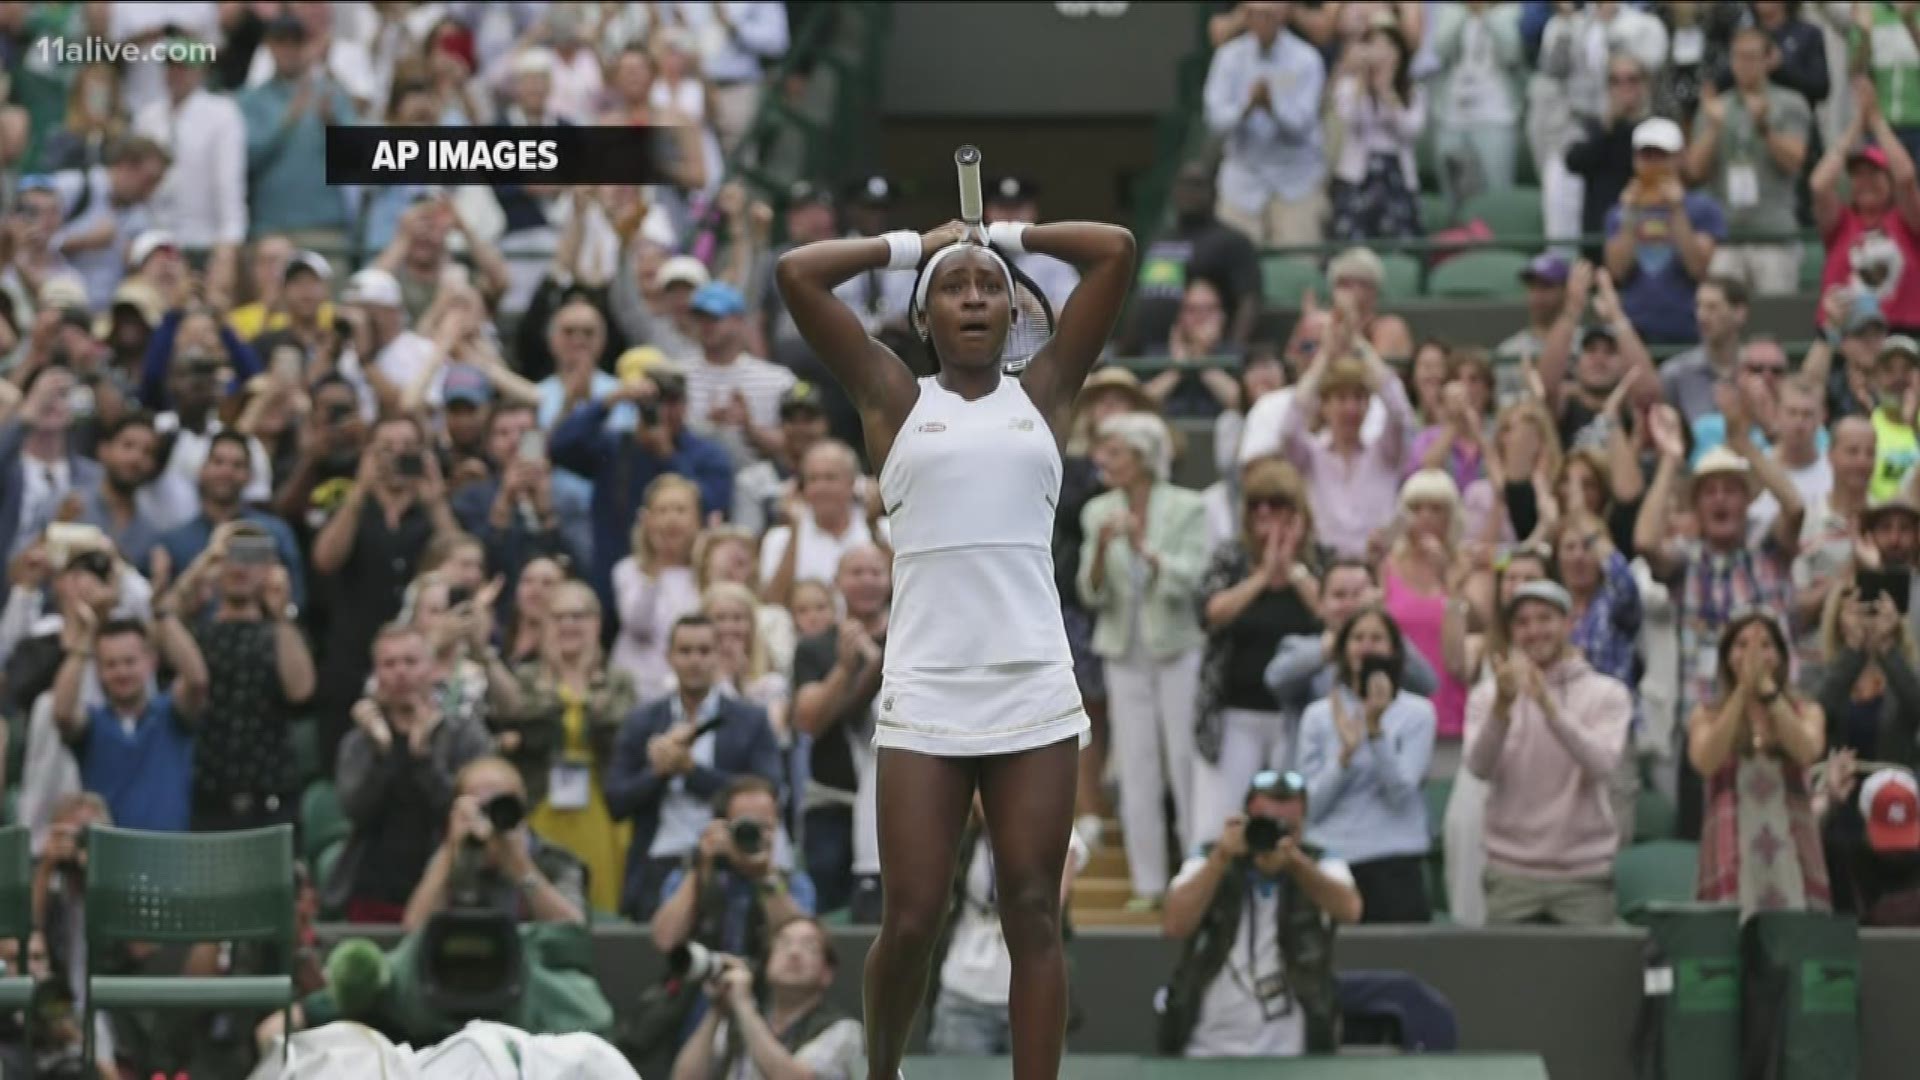 Cori "Coco" Gauff, who was born in Georgia and is now based in Florida, beat Venus Williams in the first round at Wimbledon Monday.